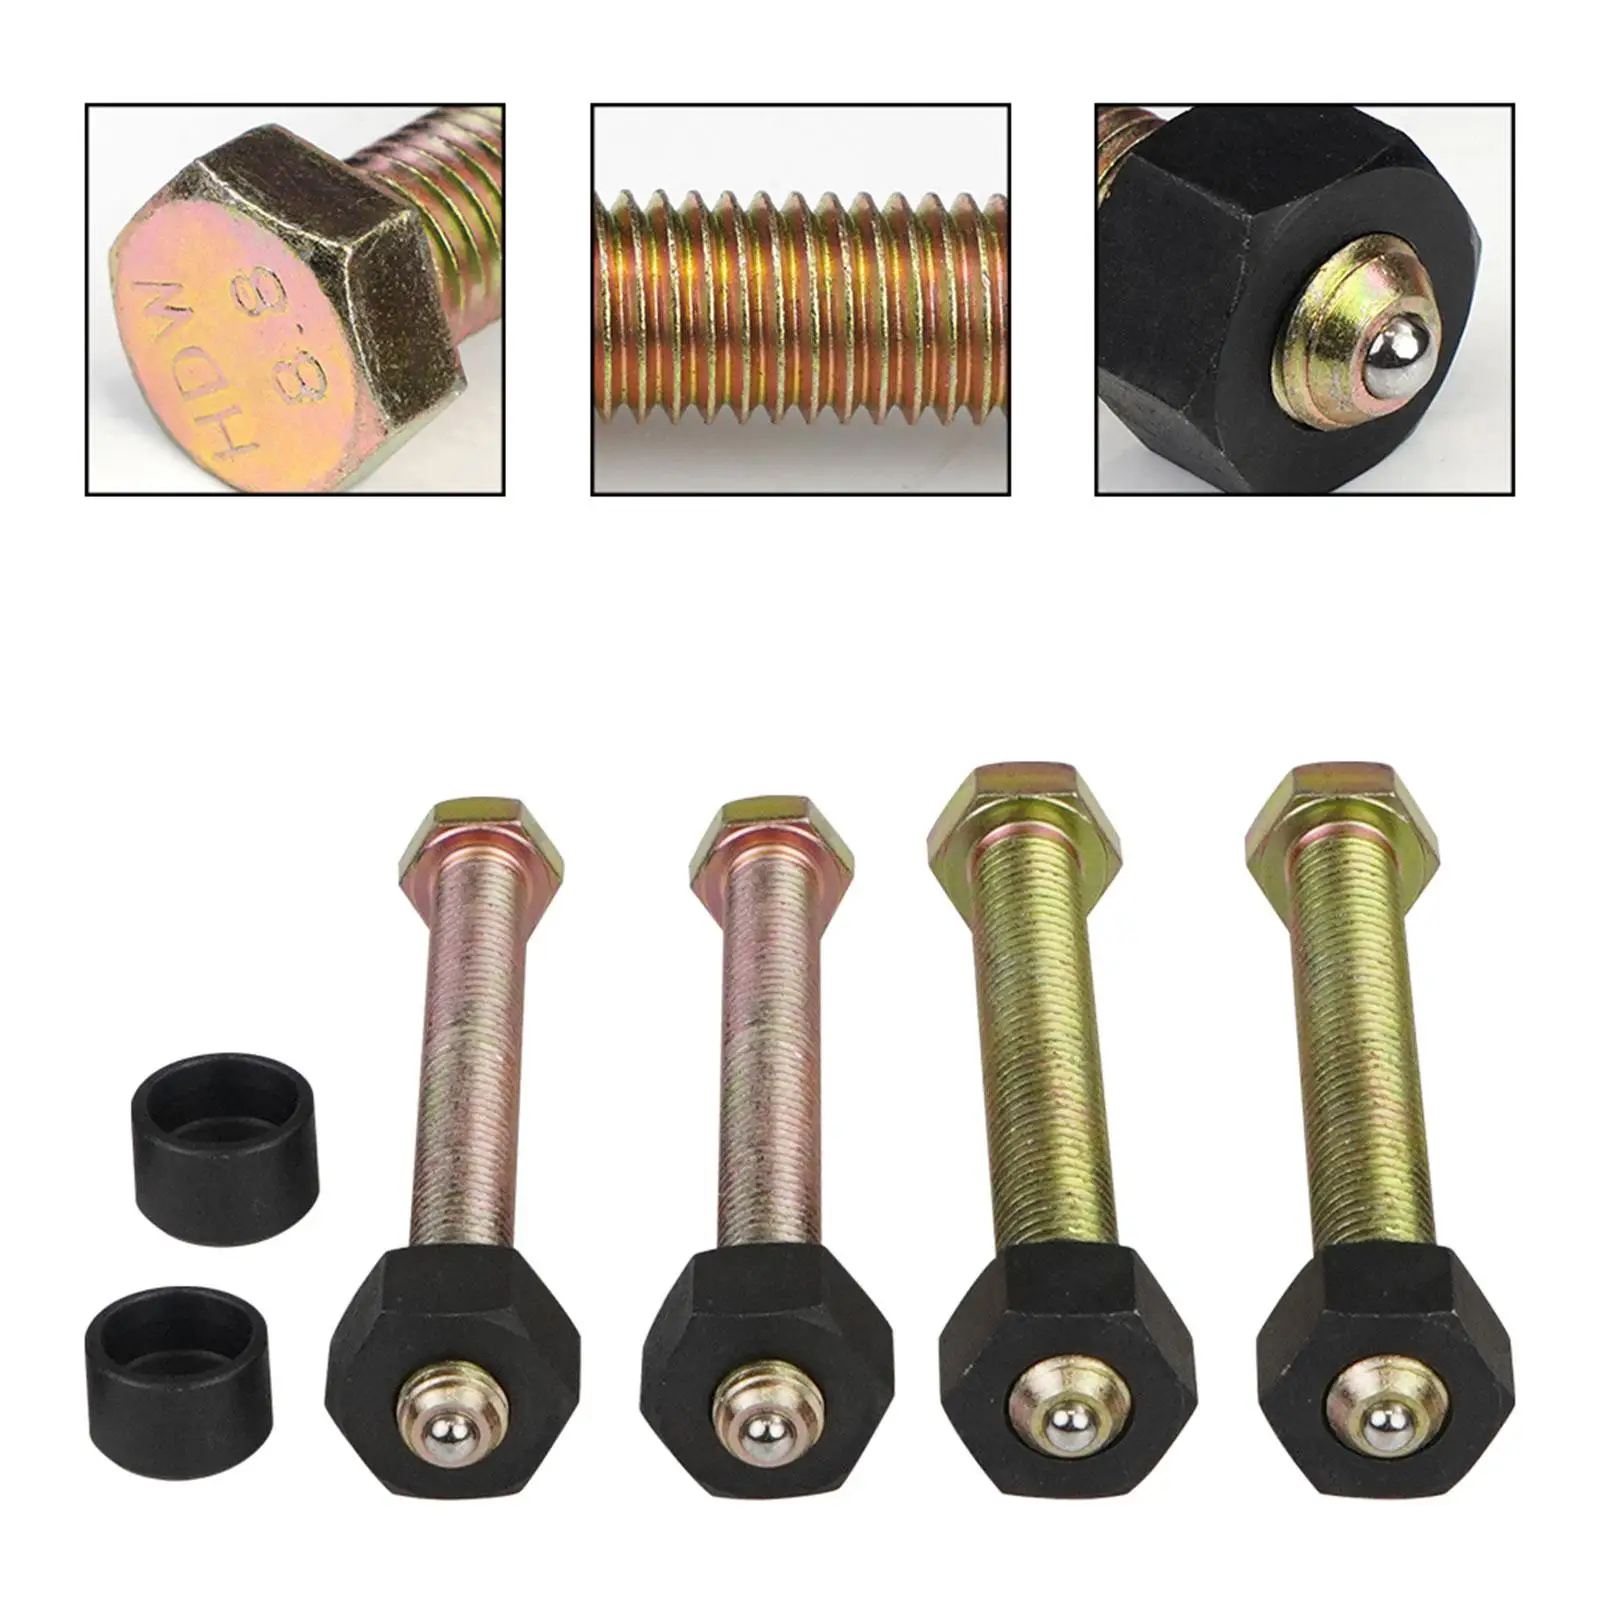 Impact Rated Hub Removal Bolt Set 78834 Replacement Easy to Install Professional Assembly Spare Parts Wheel Hub Removal Tool